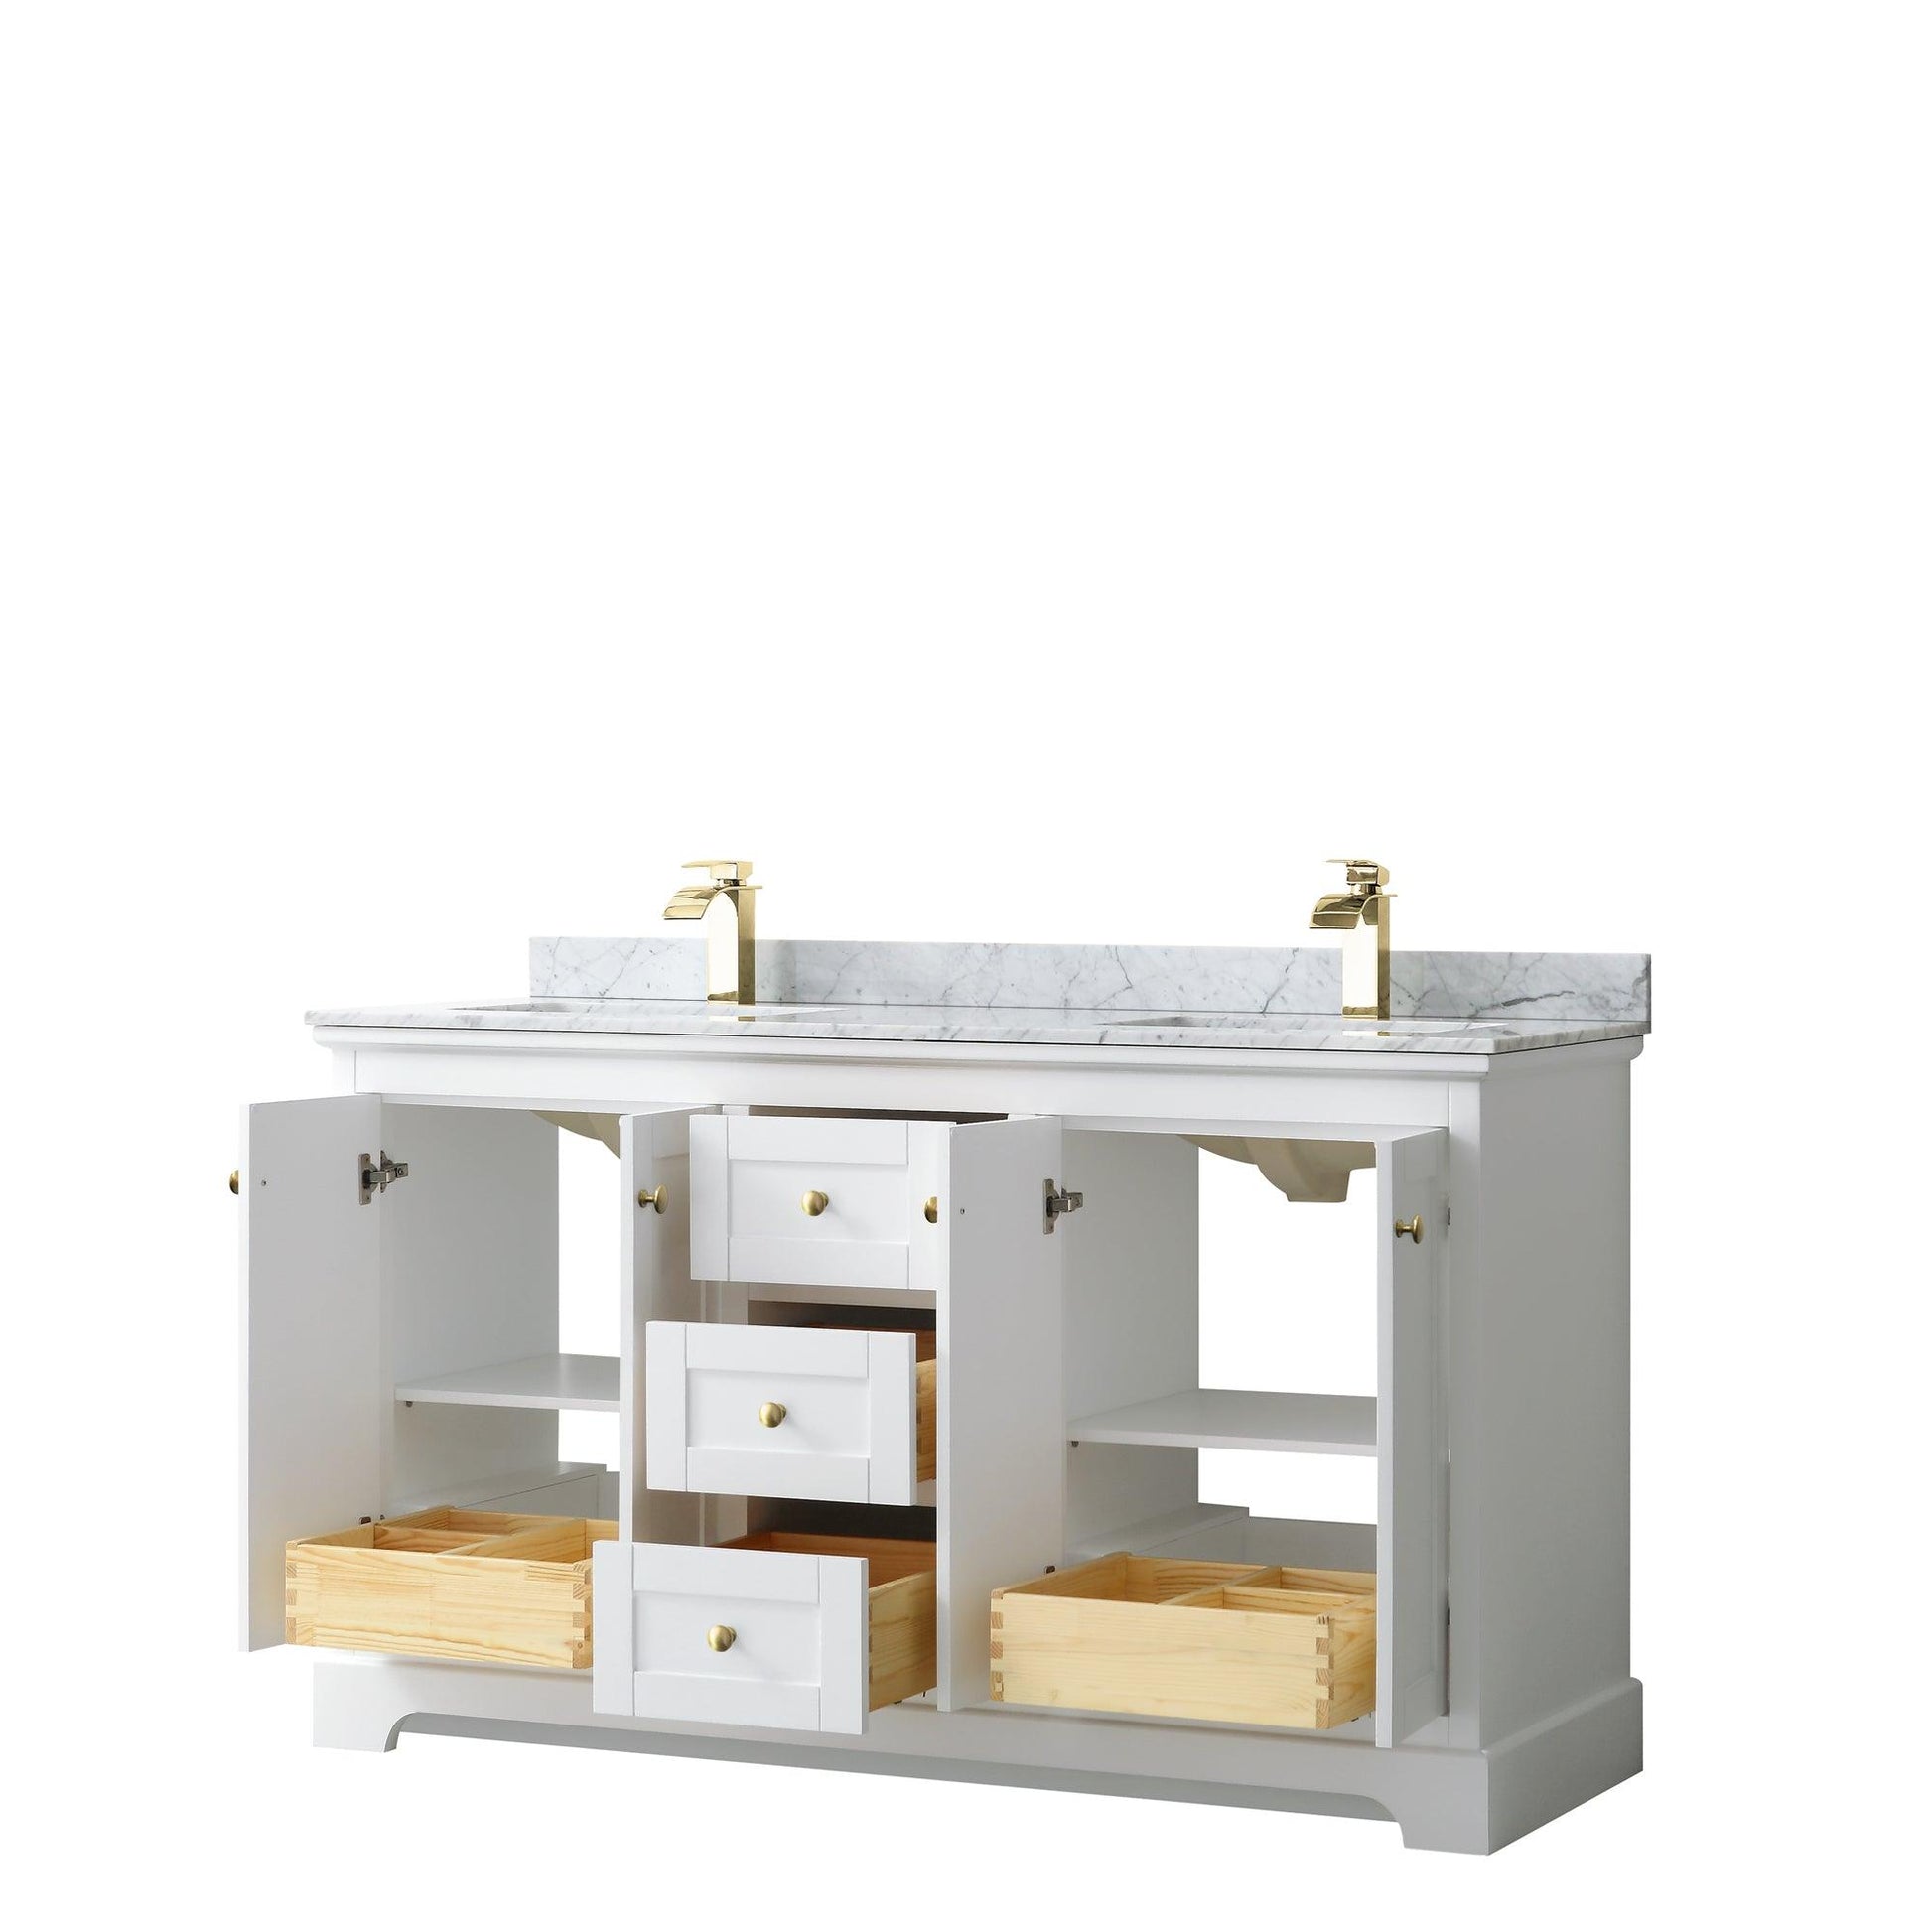 
  
  Wyndham Collection Avery Double Bathroom Vanity in White, White Carrara Marble Countertop, Undermount Square Sinks, Optional Mirror, Brushed Gold Trim
  
